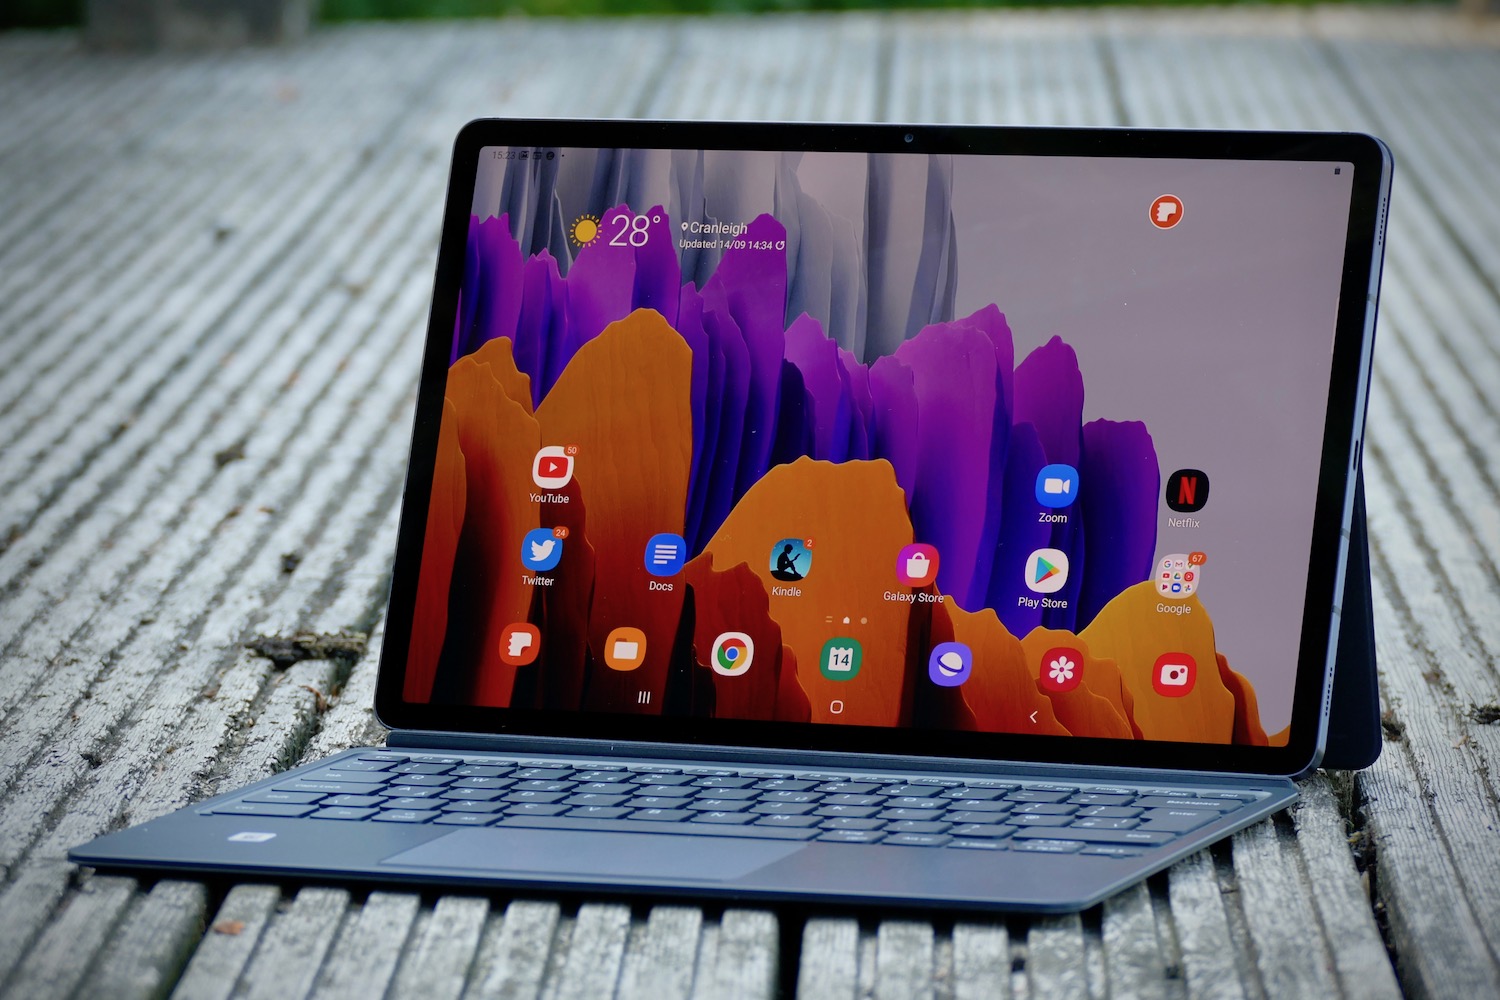 Samsung Galaxy Tab S7 Plus Review: Awesome Tablet For Video